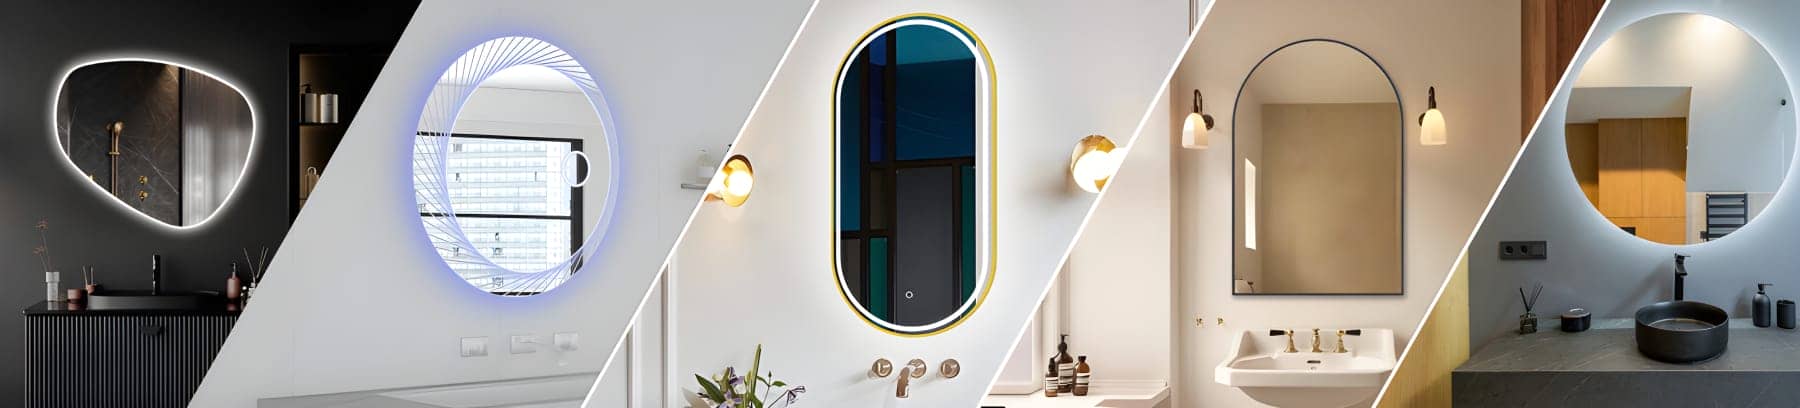 bathroom vanity led mirrors supplies point-piper